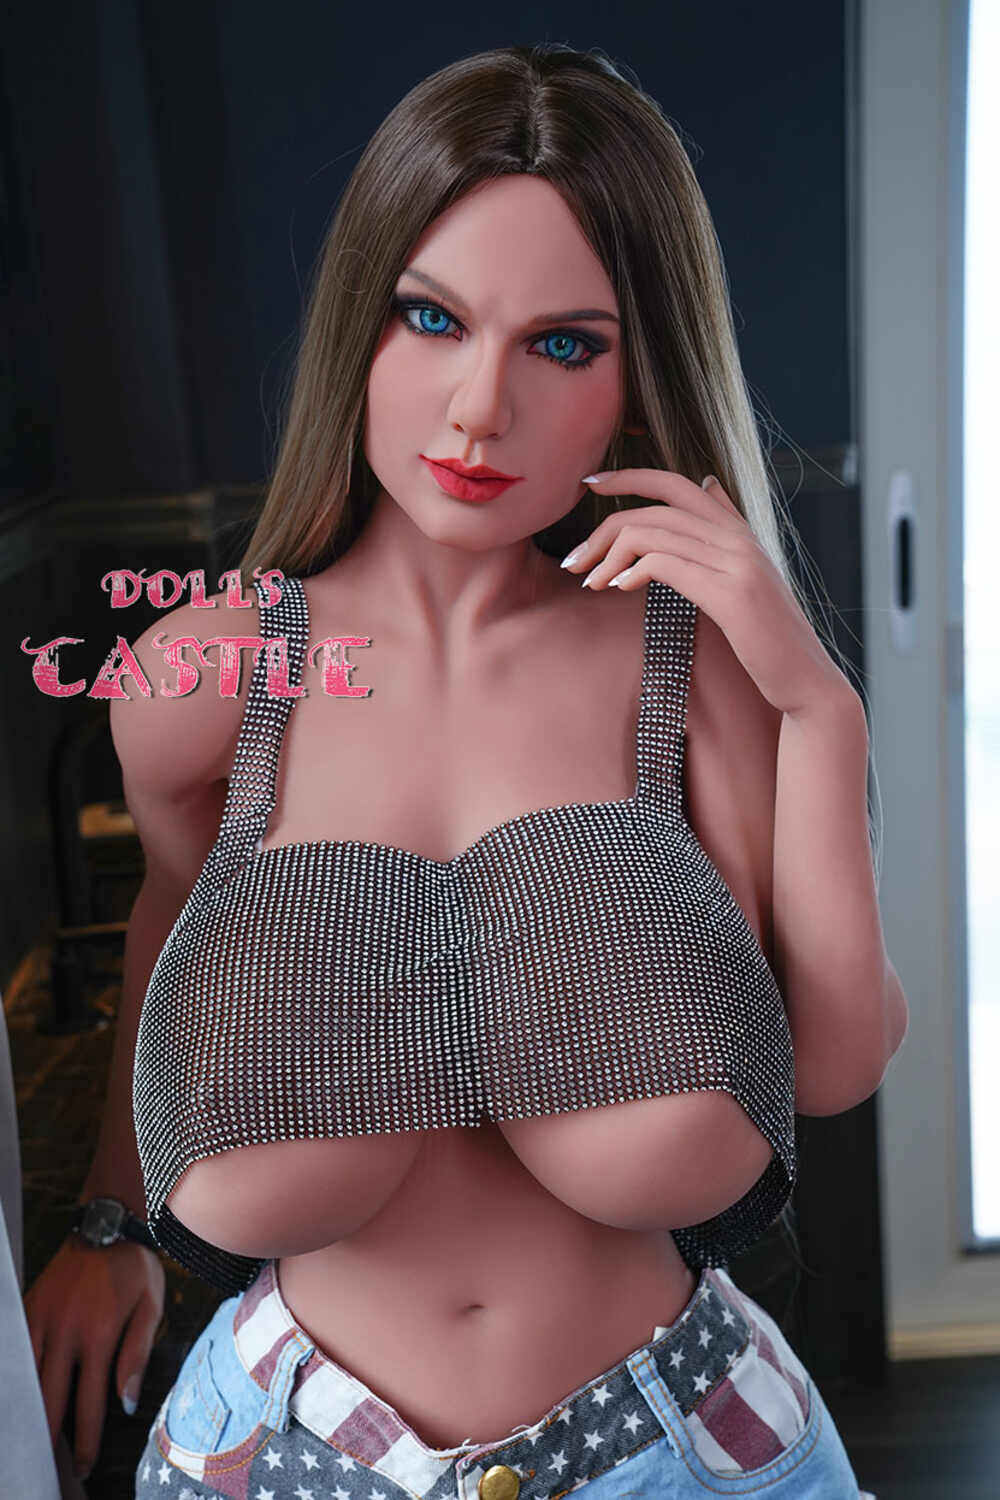 Lacy - 153cm(5ft0) Large Breast Full TPE Head Dolls Castle Doll (US In Stock) image6